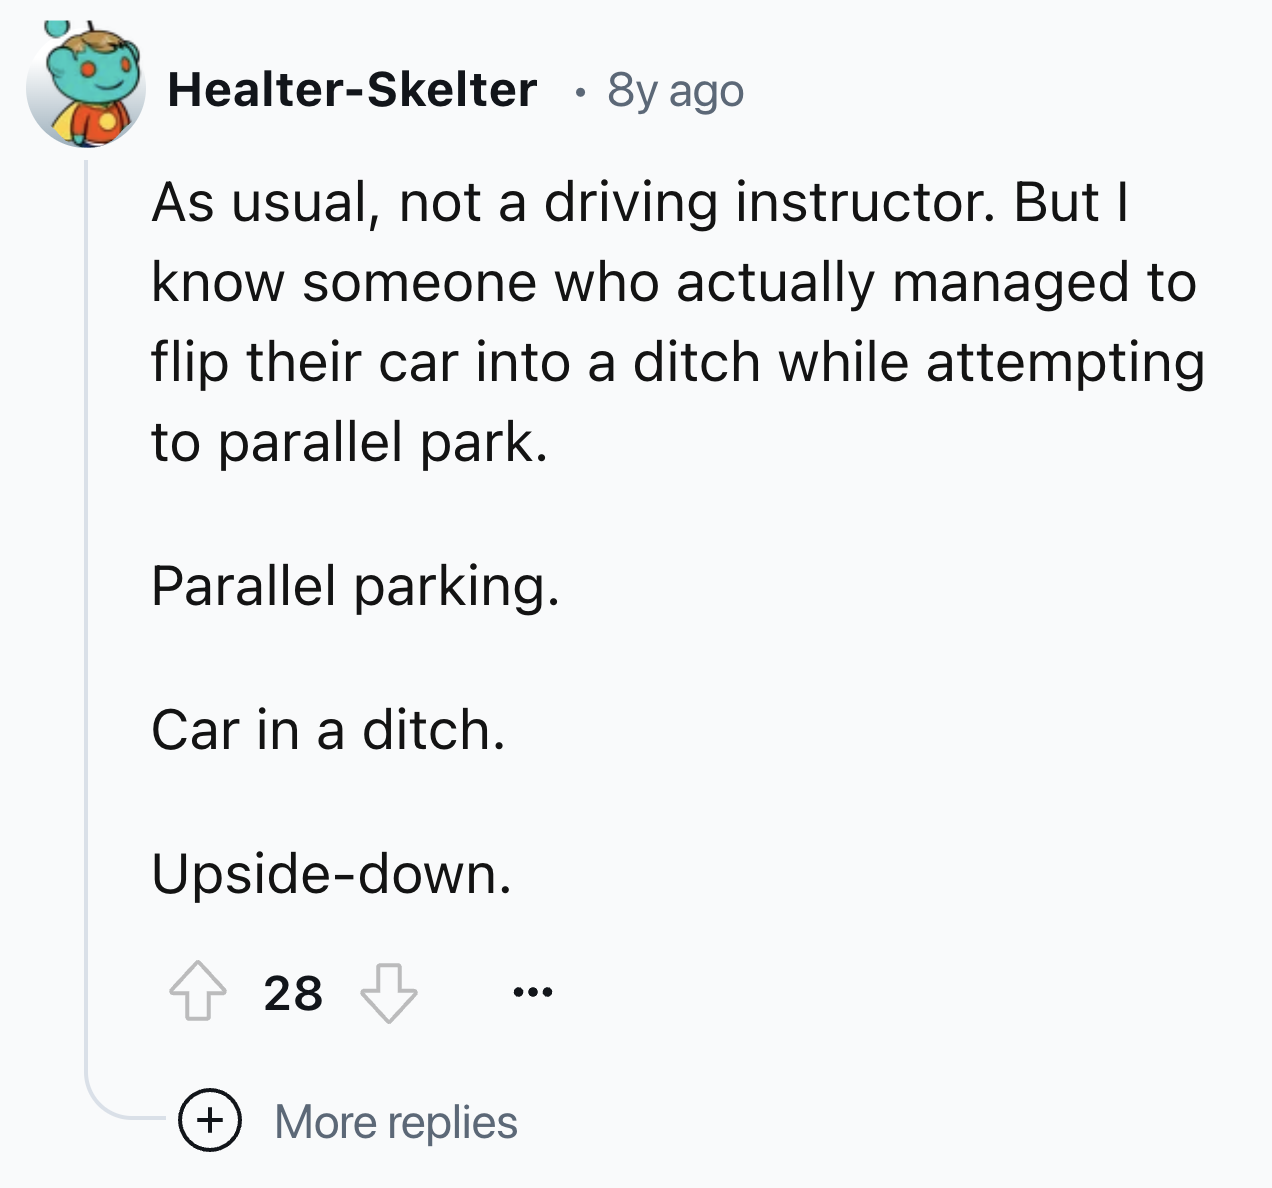 number - HealterSkelter 8y ago As usual, not a driving instructor. But I know someone who actually managed to flip their car into a ditch while attempting to parallel park. Parallel parking. Car in a ditch. Upsidedown. 28 More replies